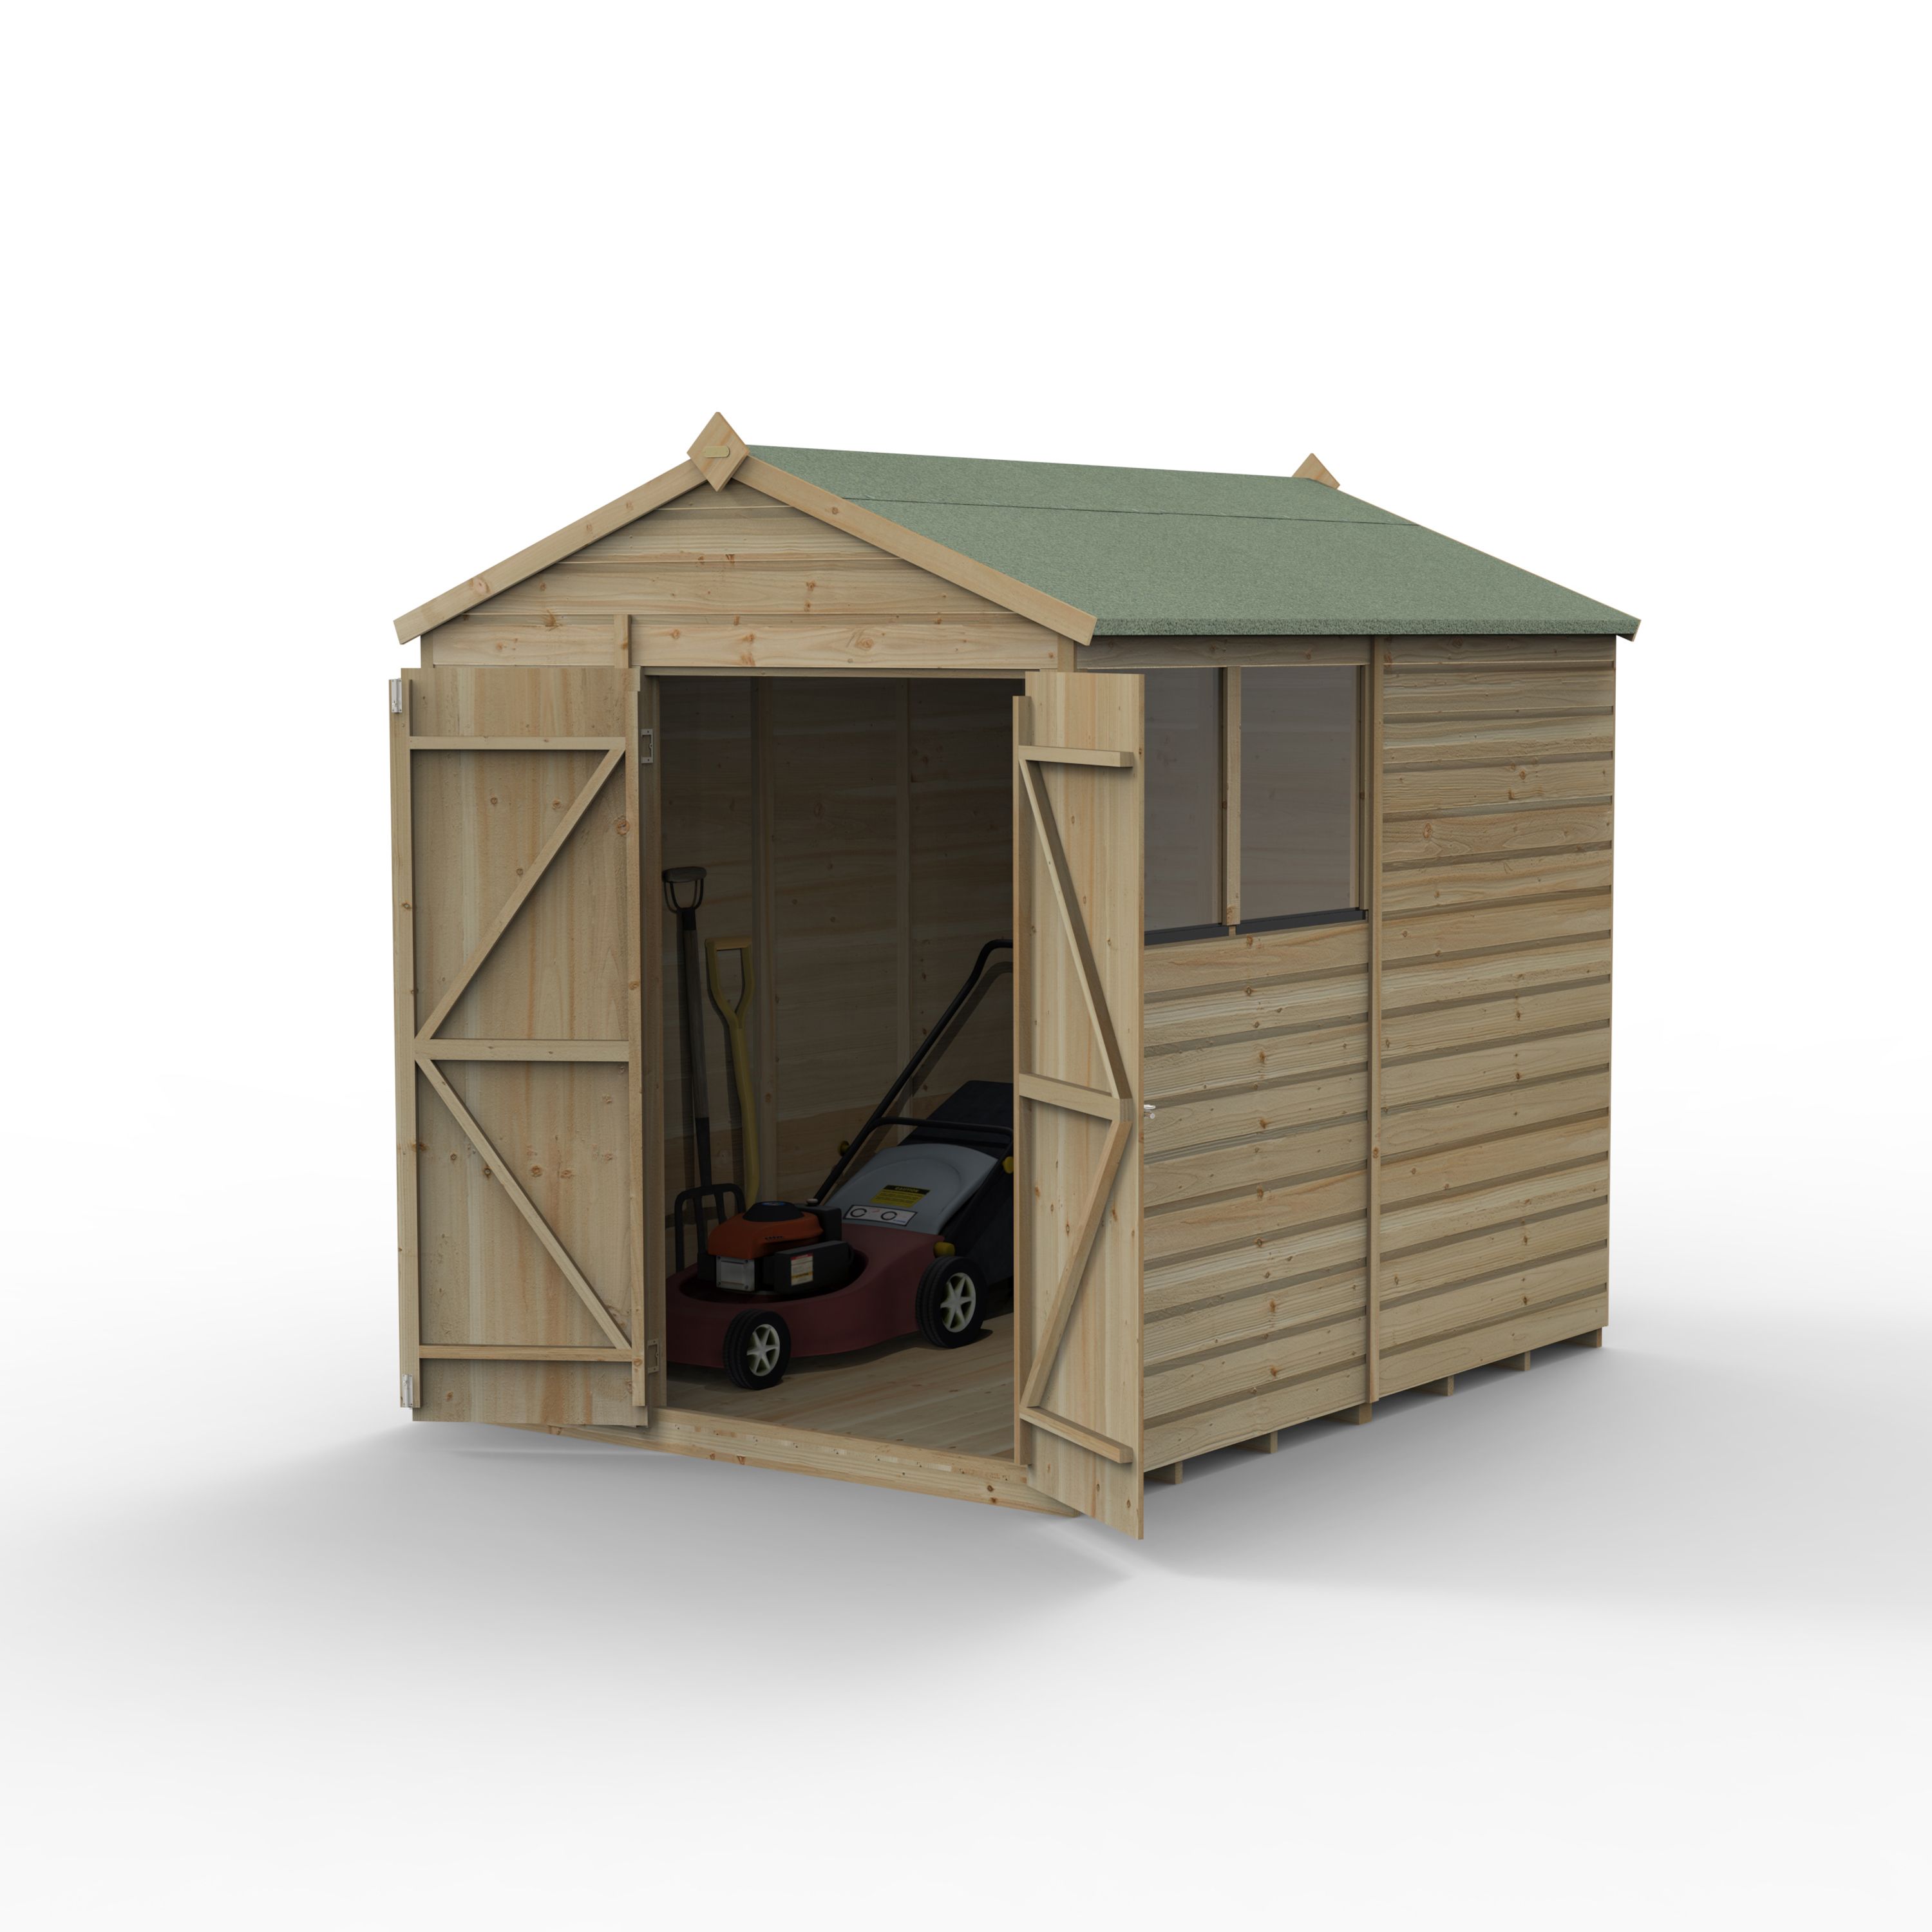 Forest Garden Beckwood 8x6 ft Apex Natural timber Wooden 2 door Shed with floor & 2 windows (Base included)